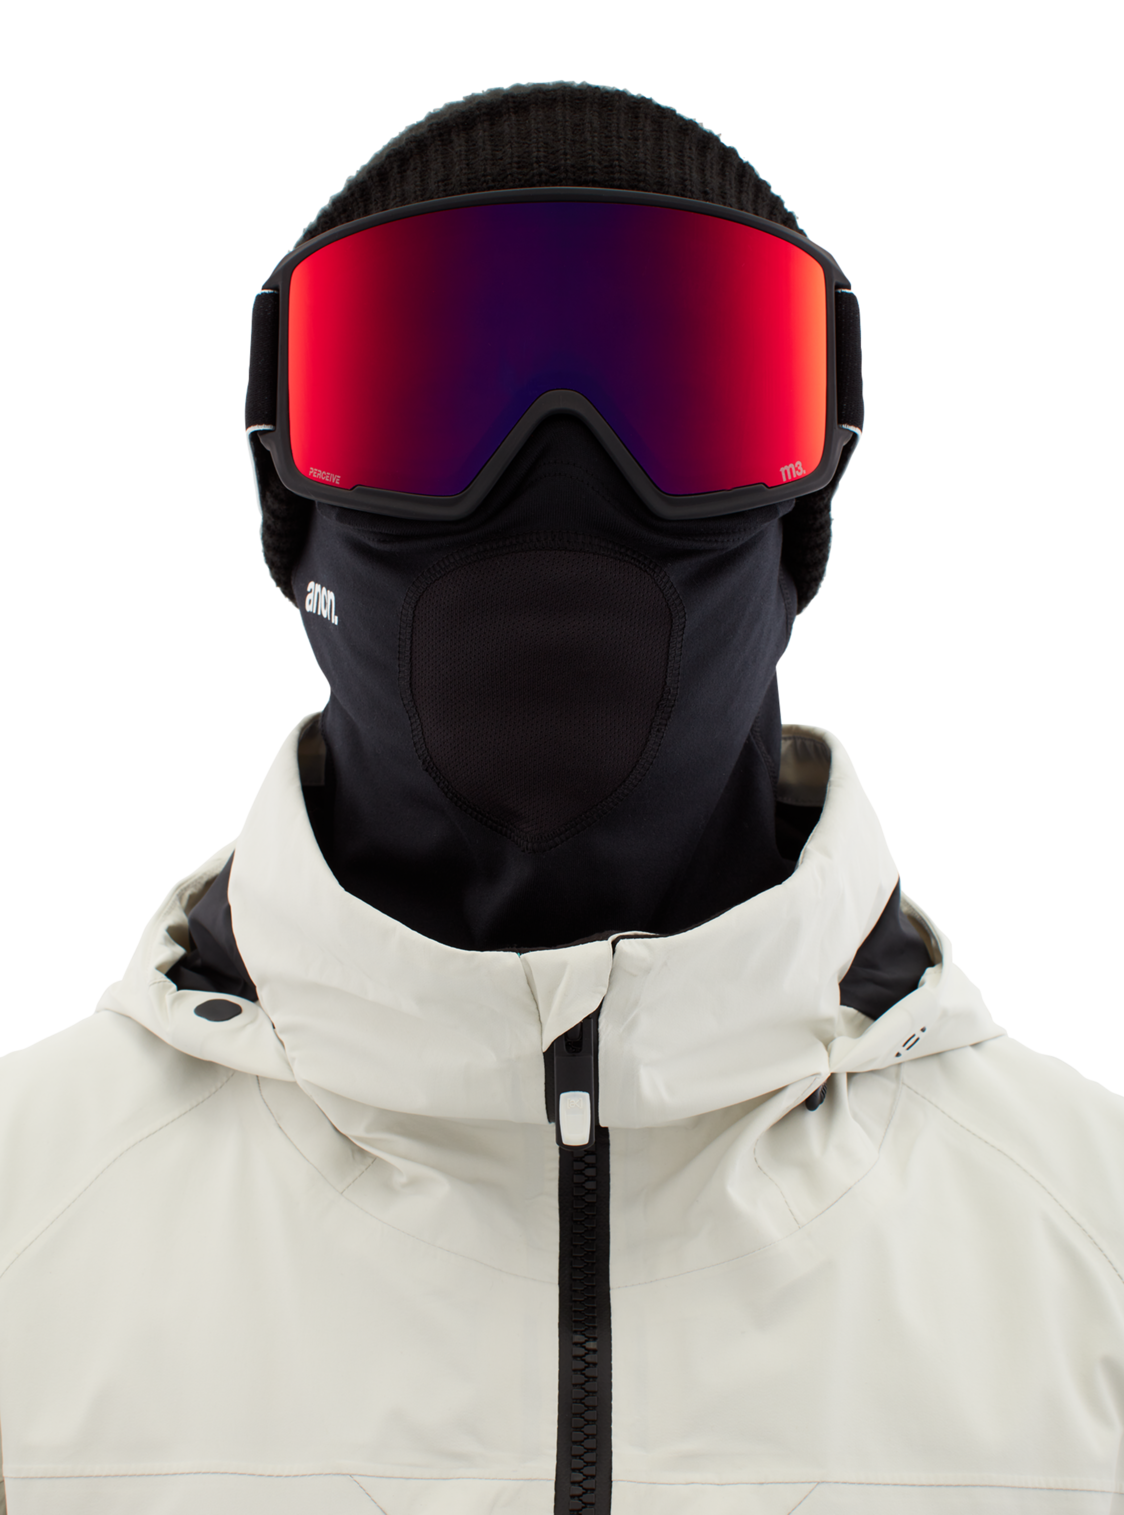 Anon M3 goggle black / perceive sun red (including extra lens and MFI mask)